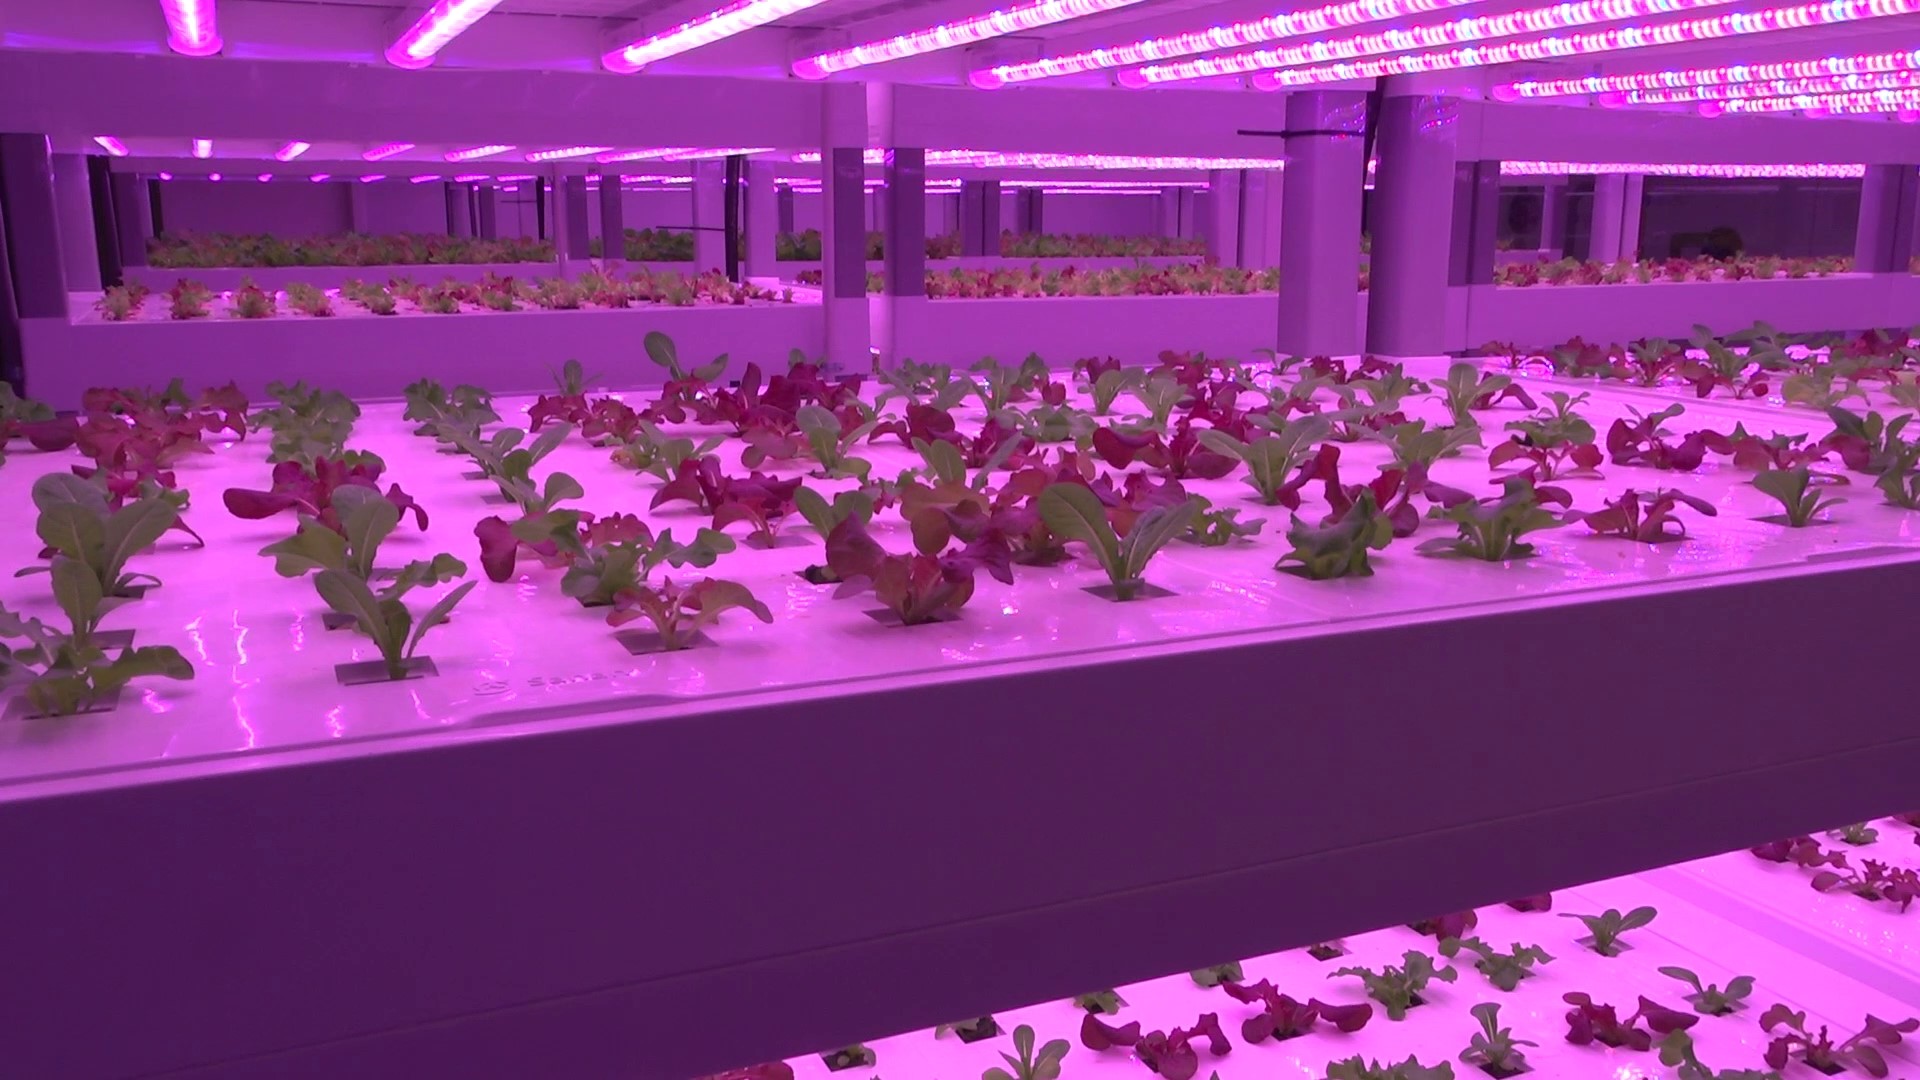 "It is a purpose-driven project that uses cutting-edge tech to feed the folks that need it most," said hydroponic farmer Aaron Thormodsen.